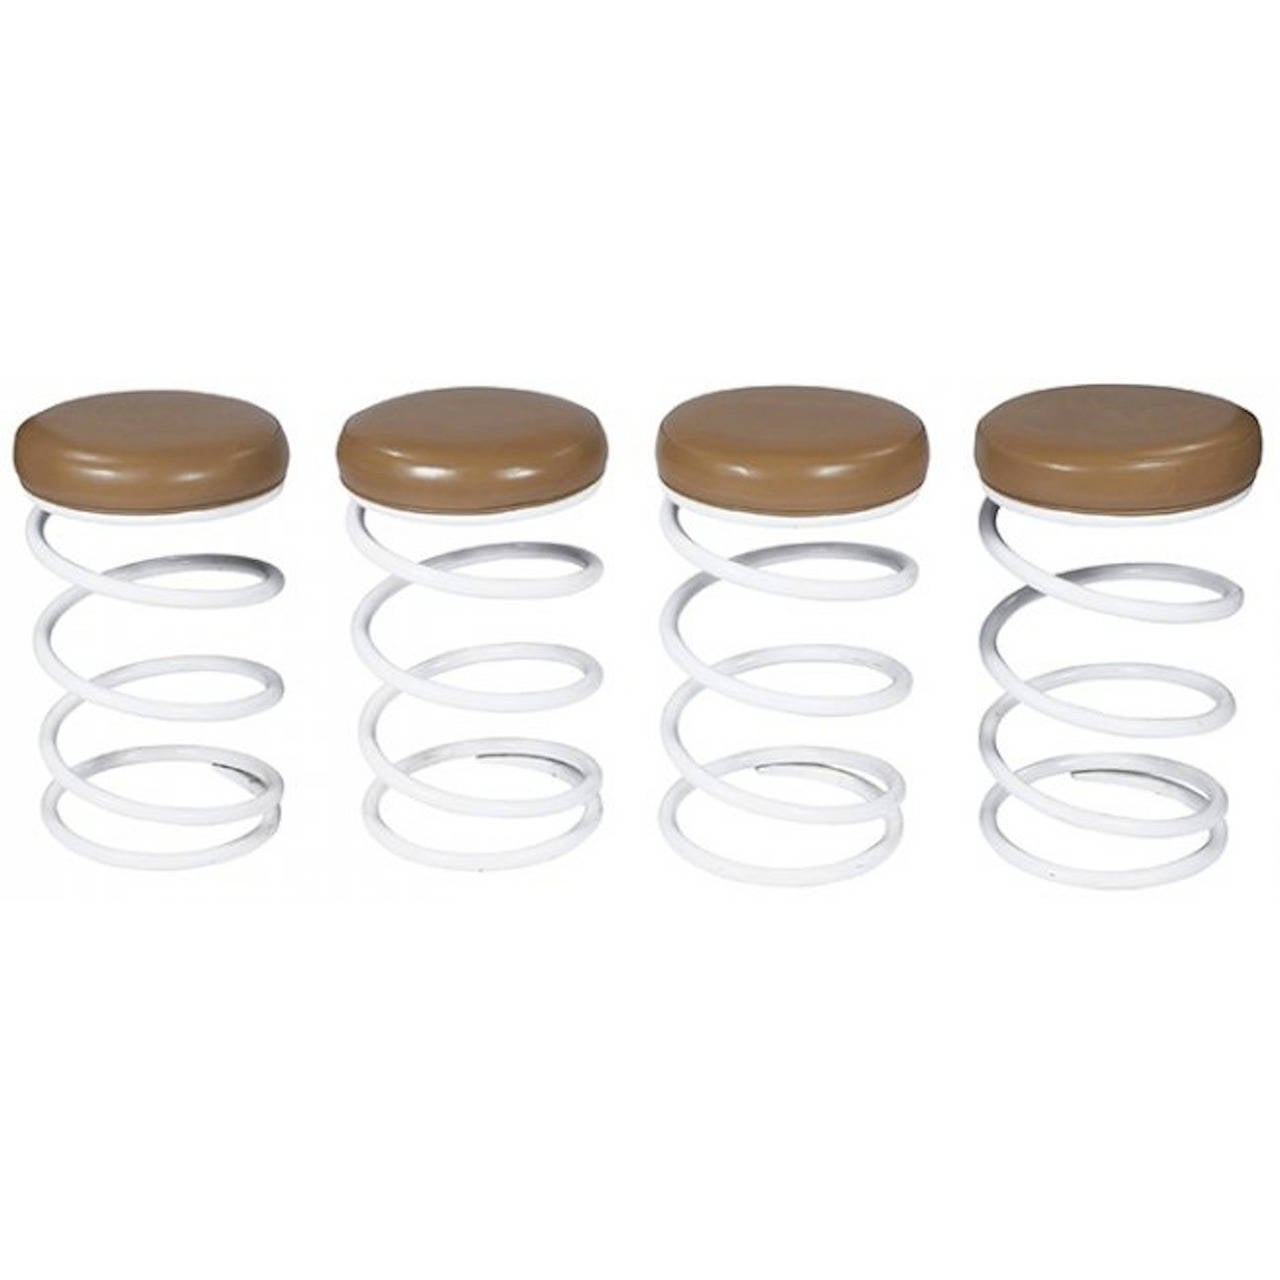 Four Steel Spring Coil Bar Stools, Coil Spring Bar Stools